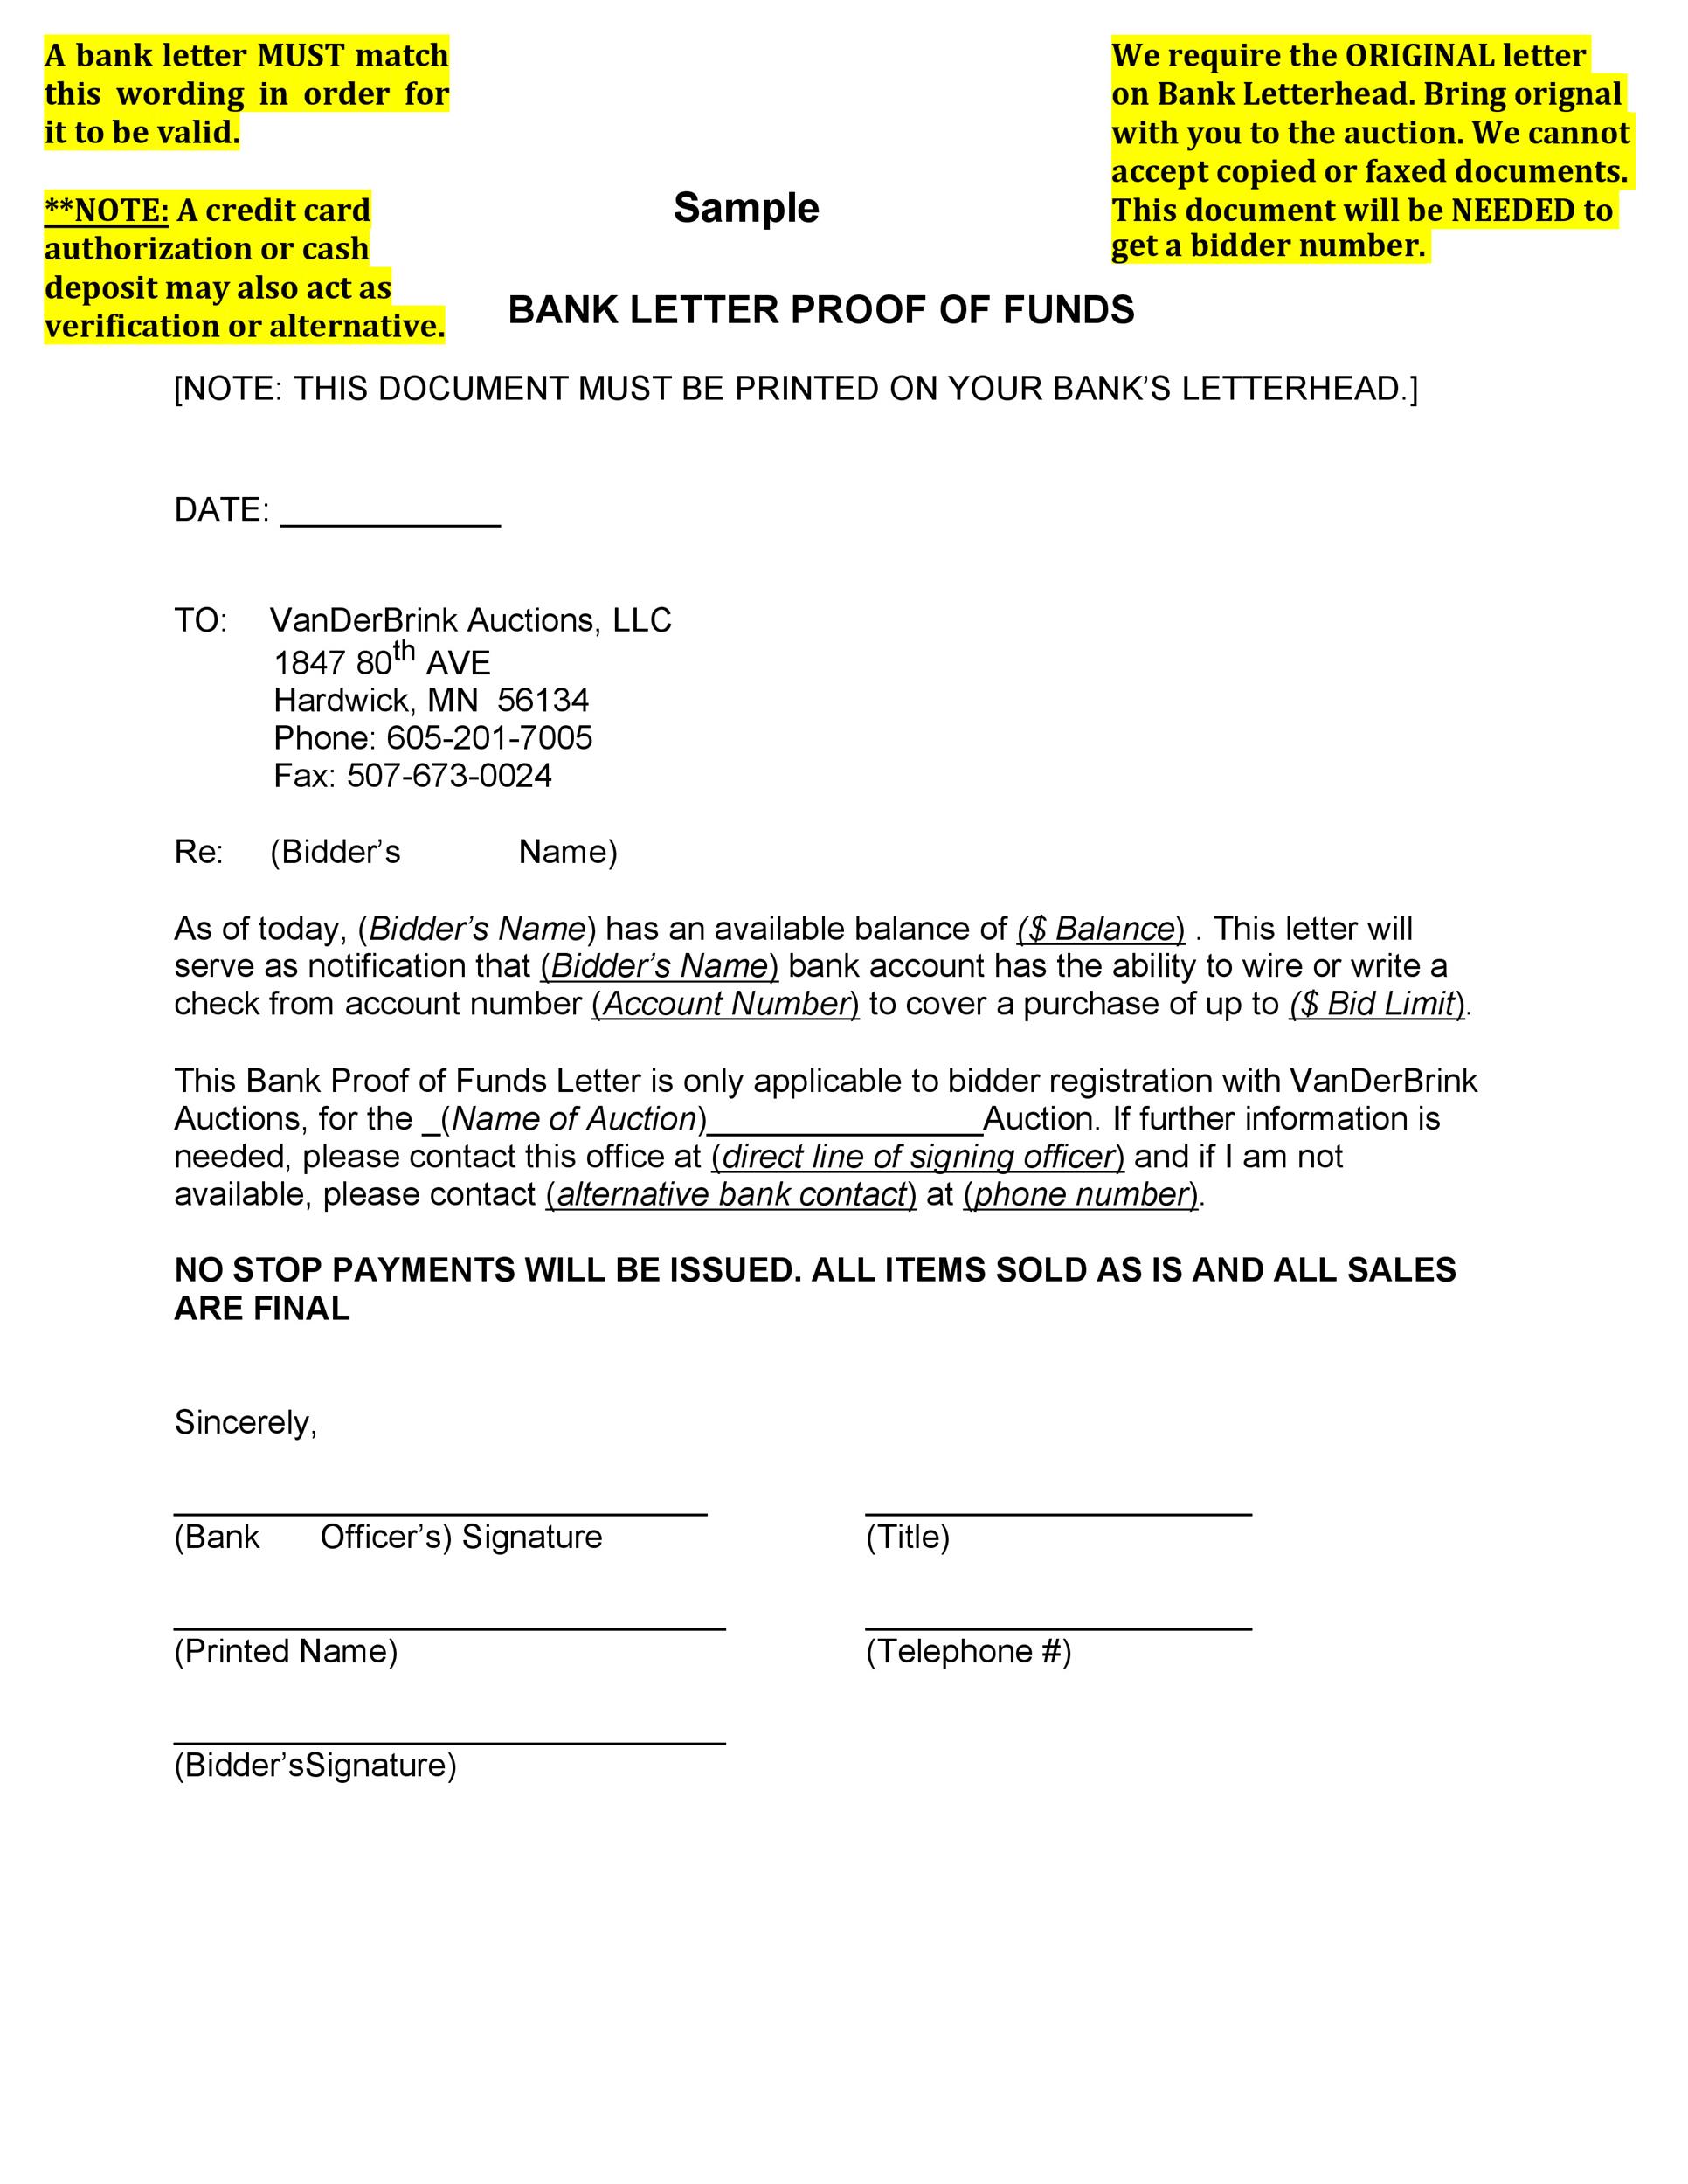 Sample Letter To Add Signatory To Bank Account from templatelab.com